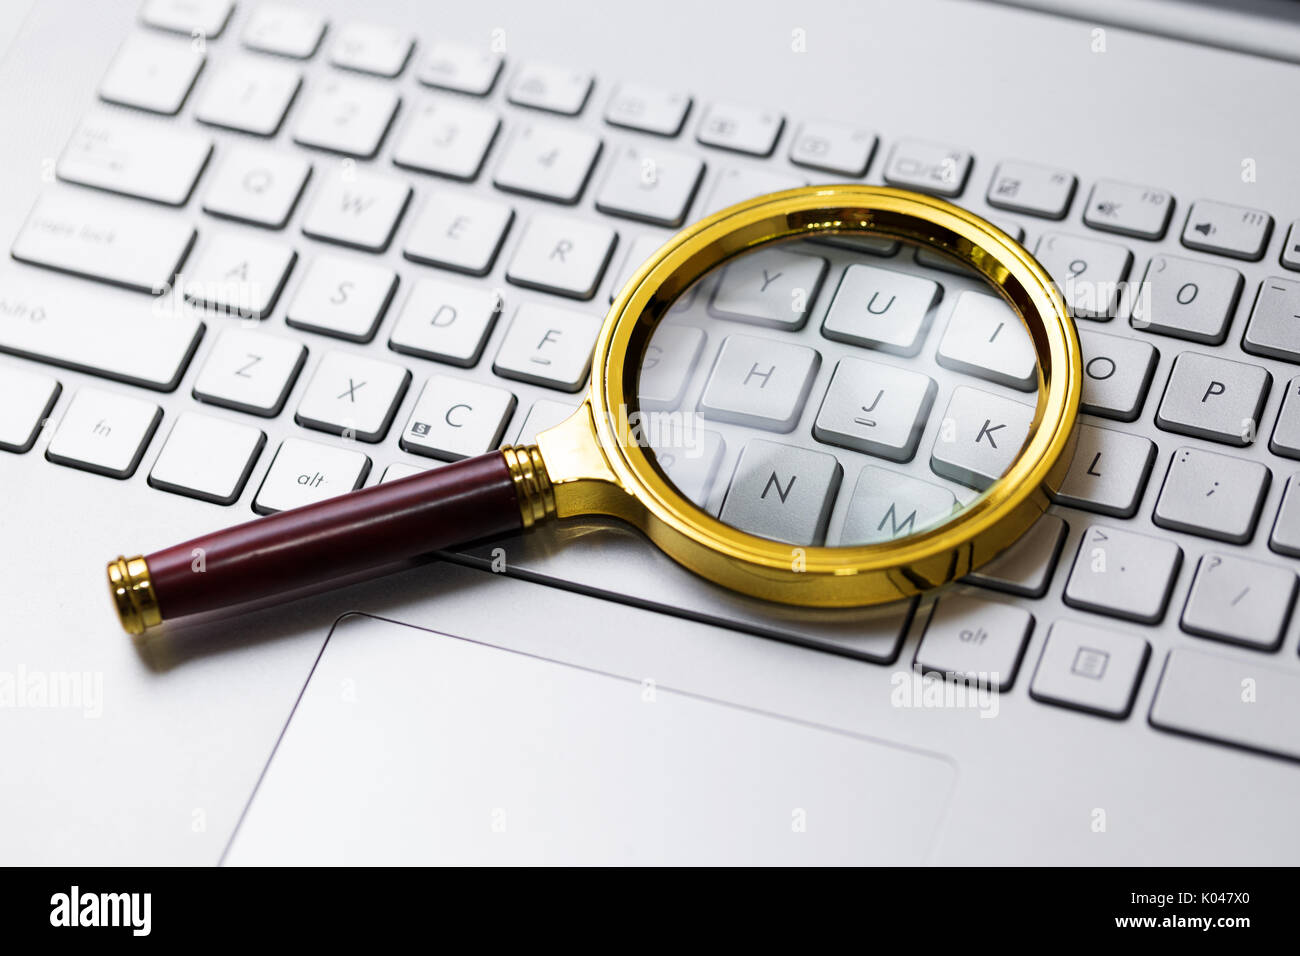 information search on internet concept. magnifying glass on the keyboard Stock Photo